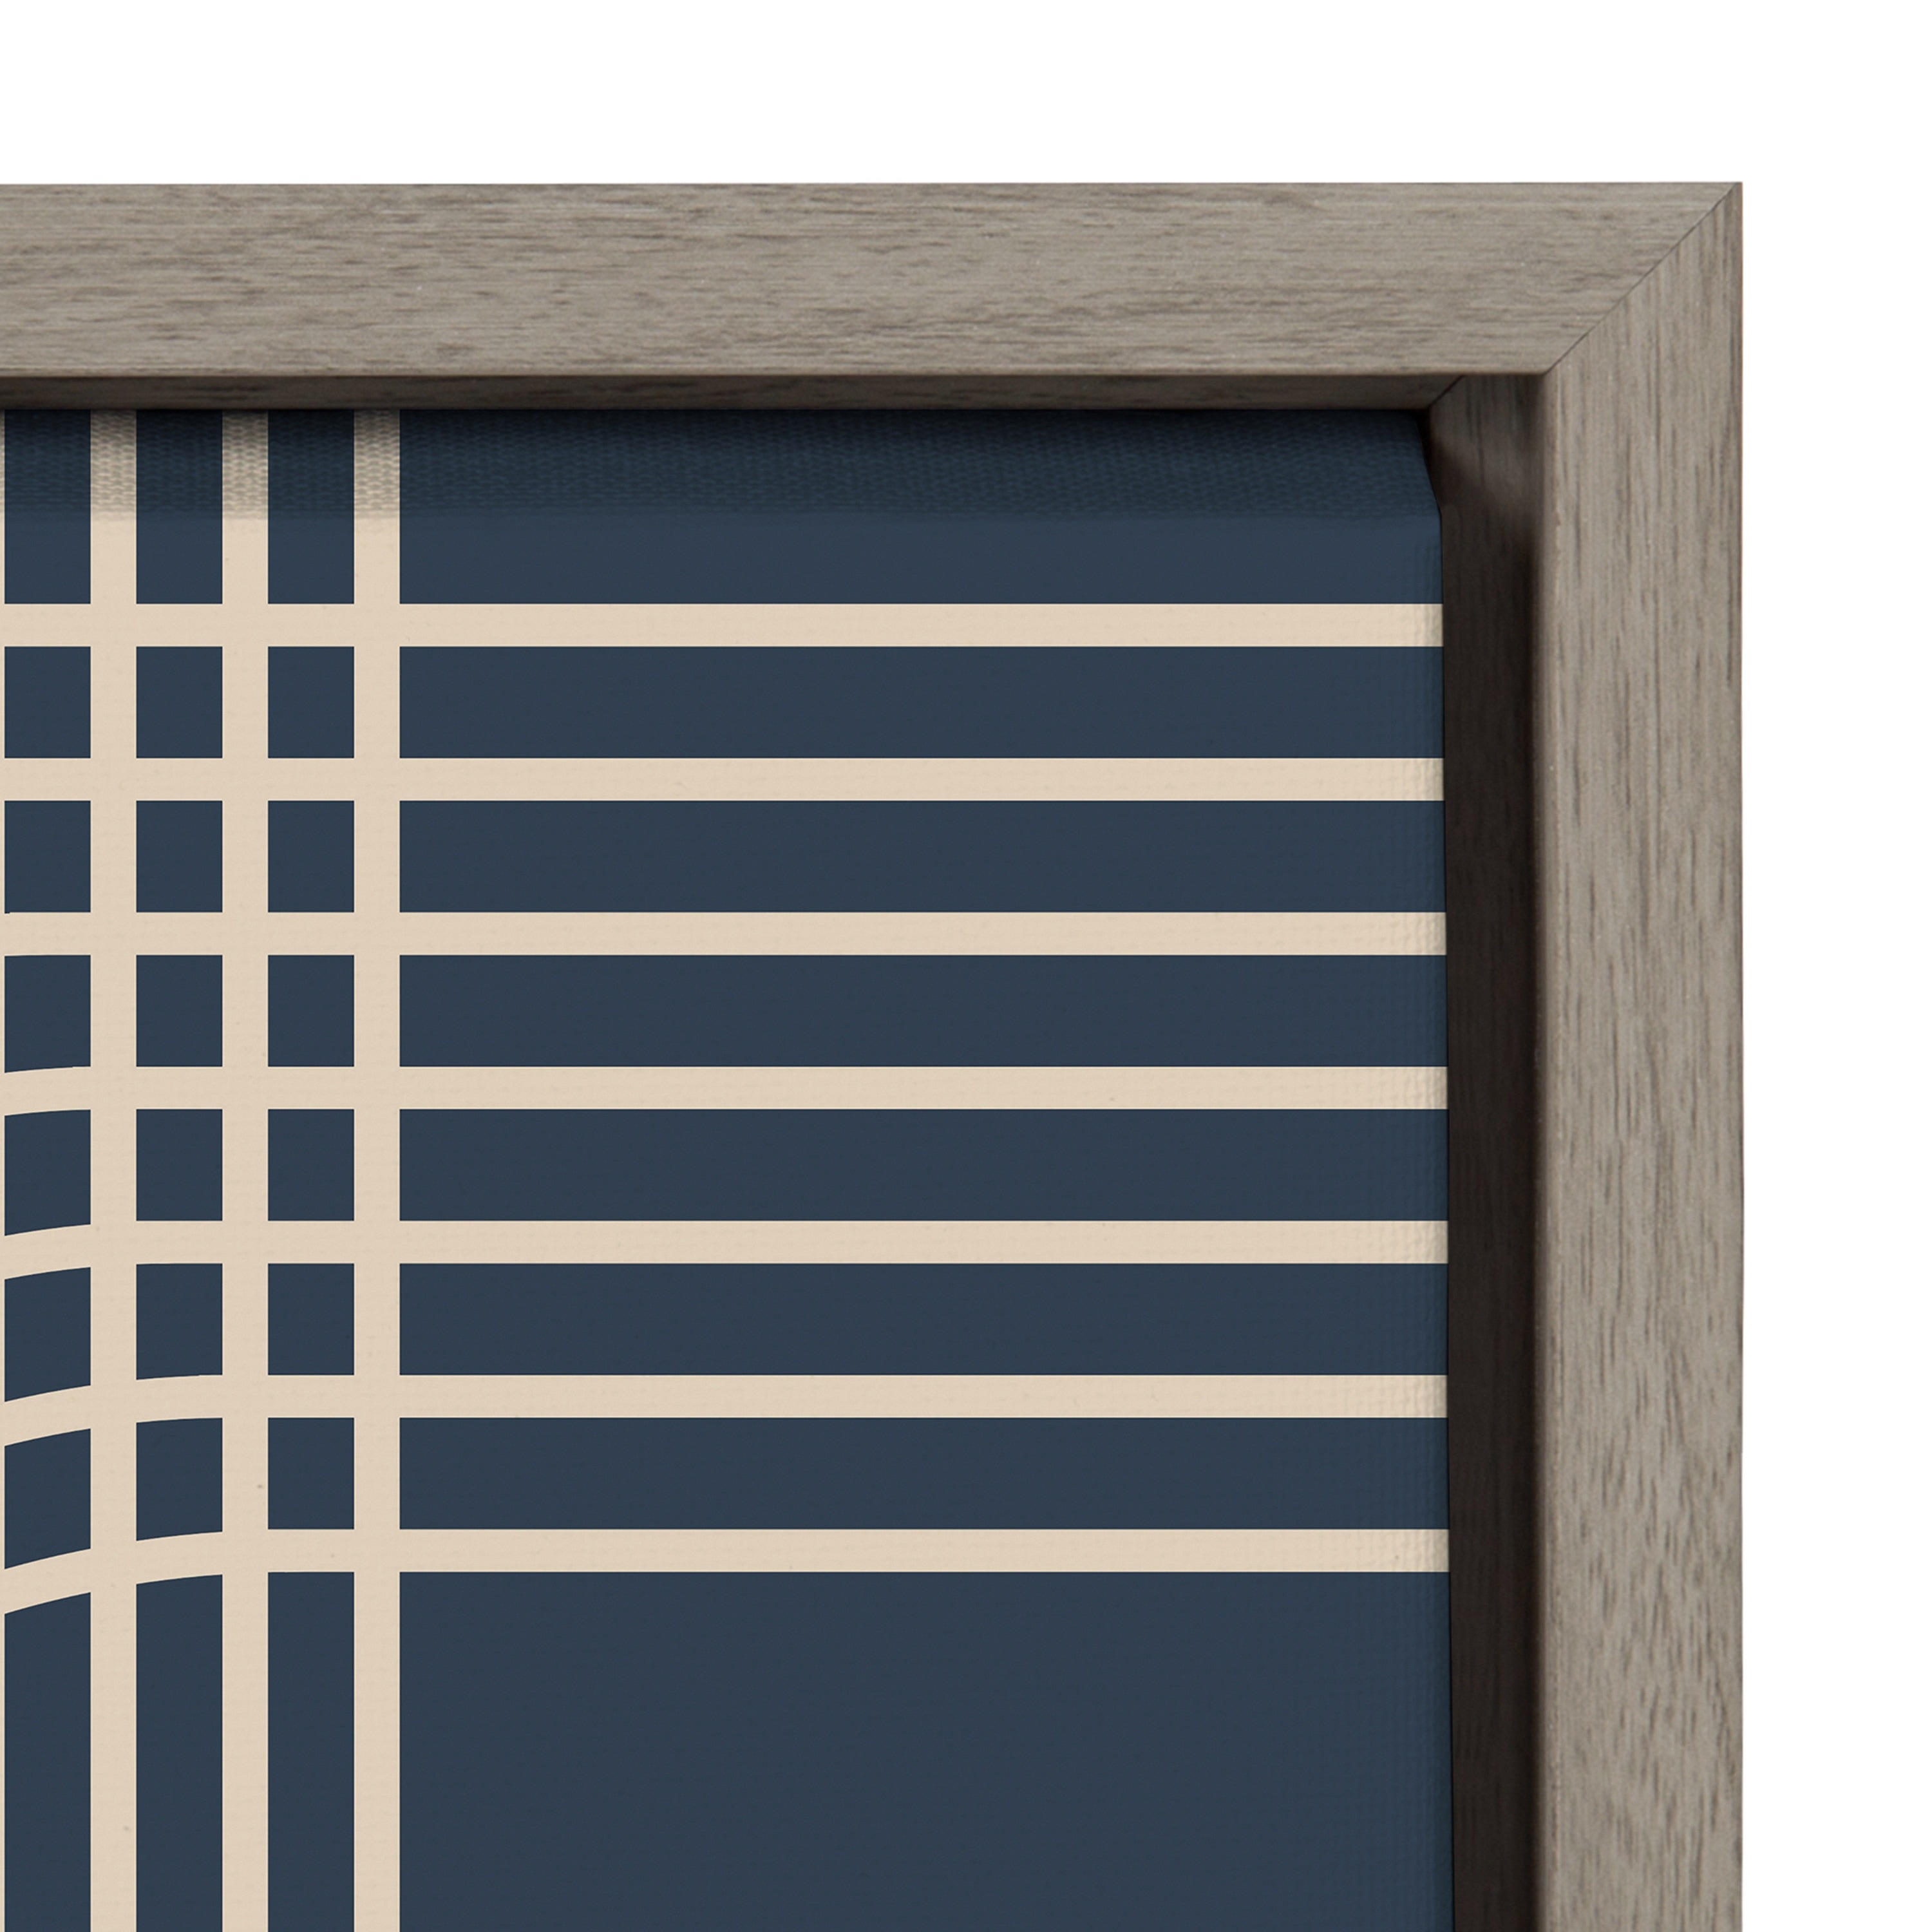 Kate and Laurel Sylvie Blue Lines Framed Canvas by Apricot and Birch Bed  Bath  Beyond 32746618